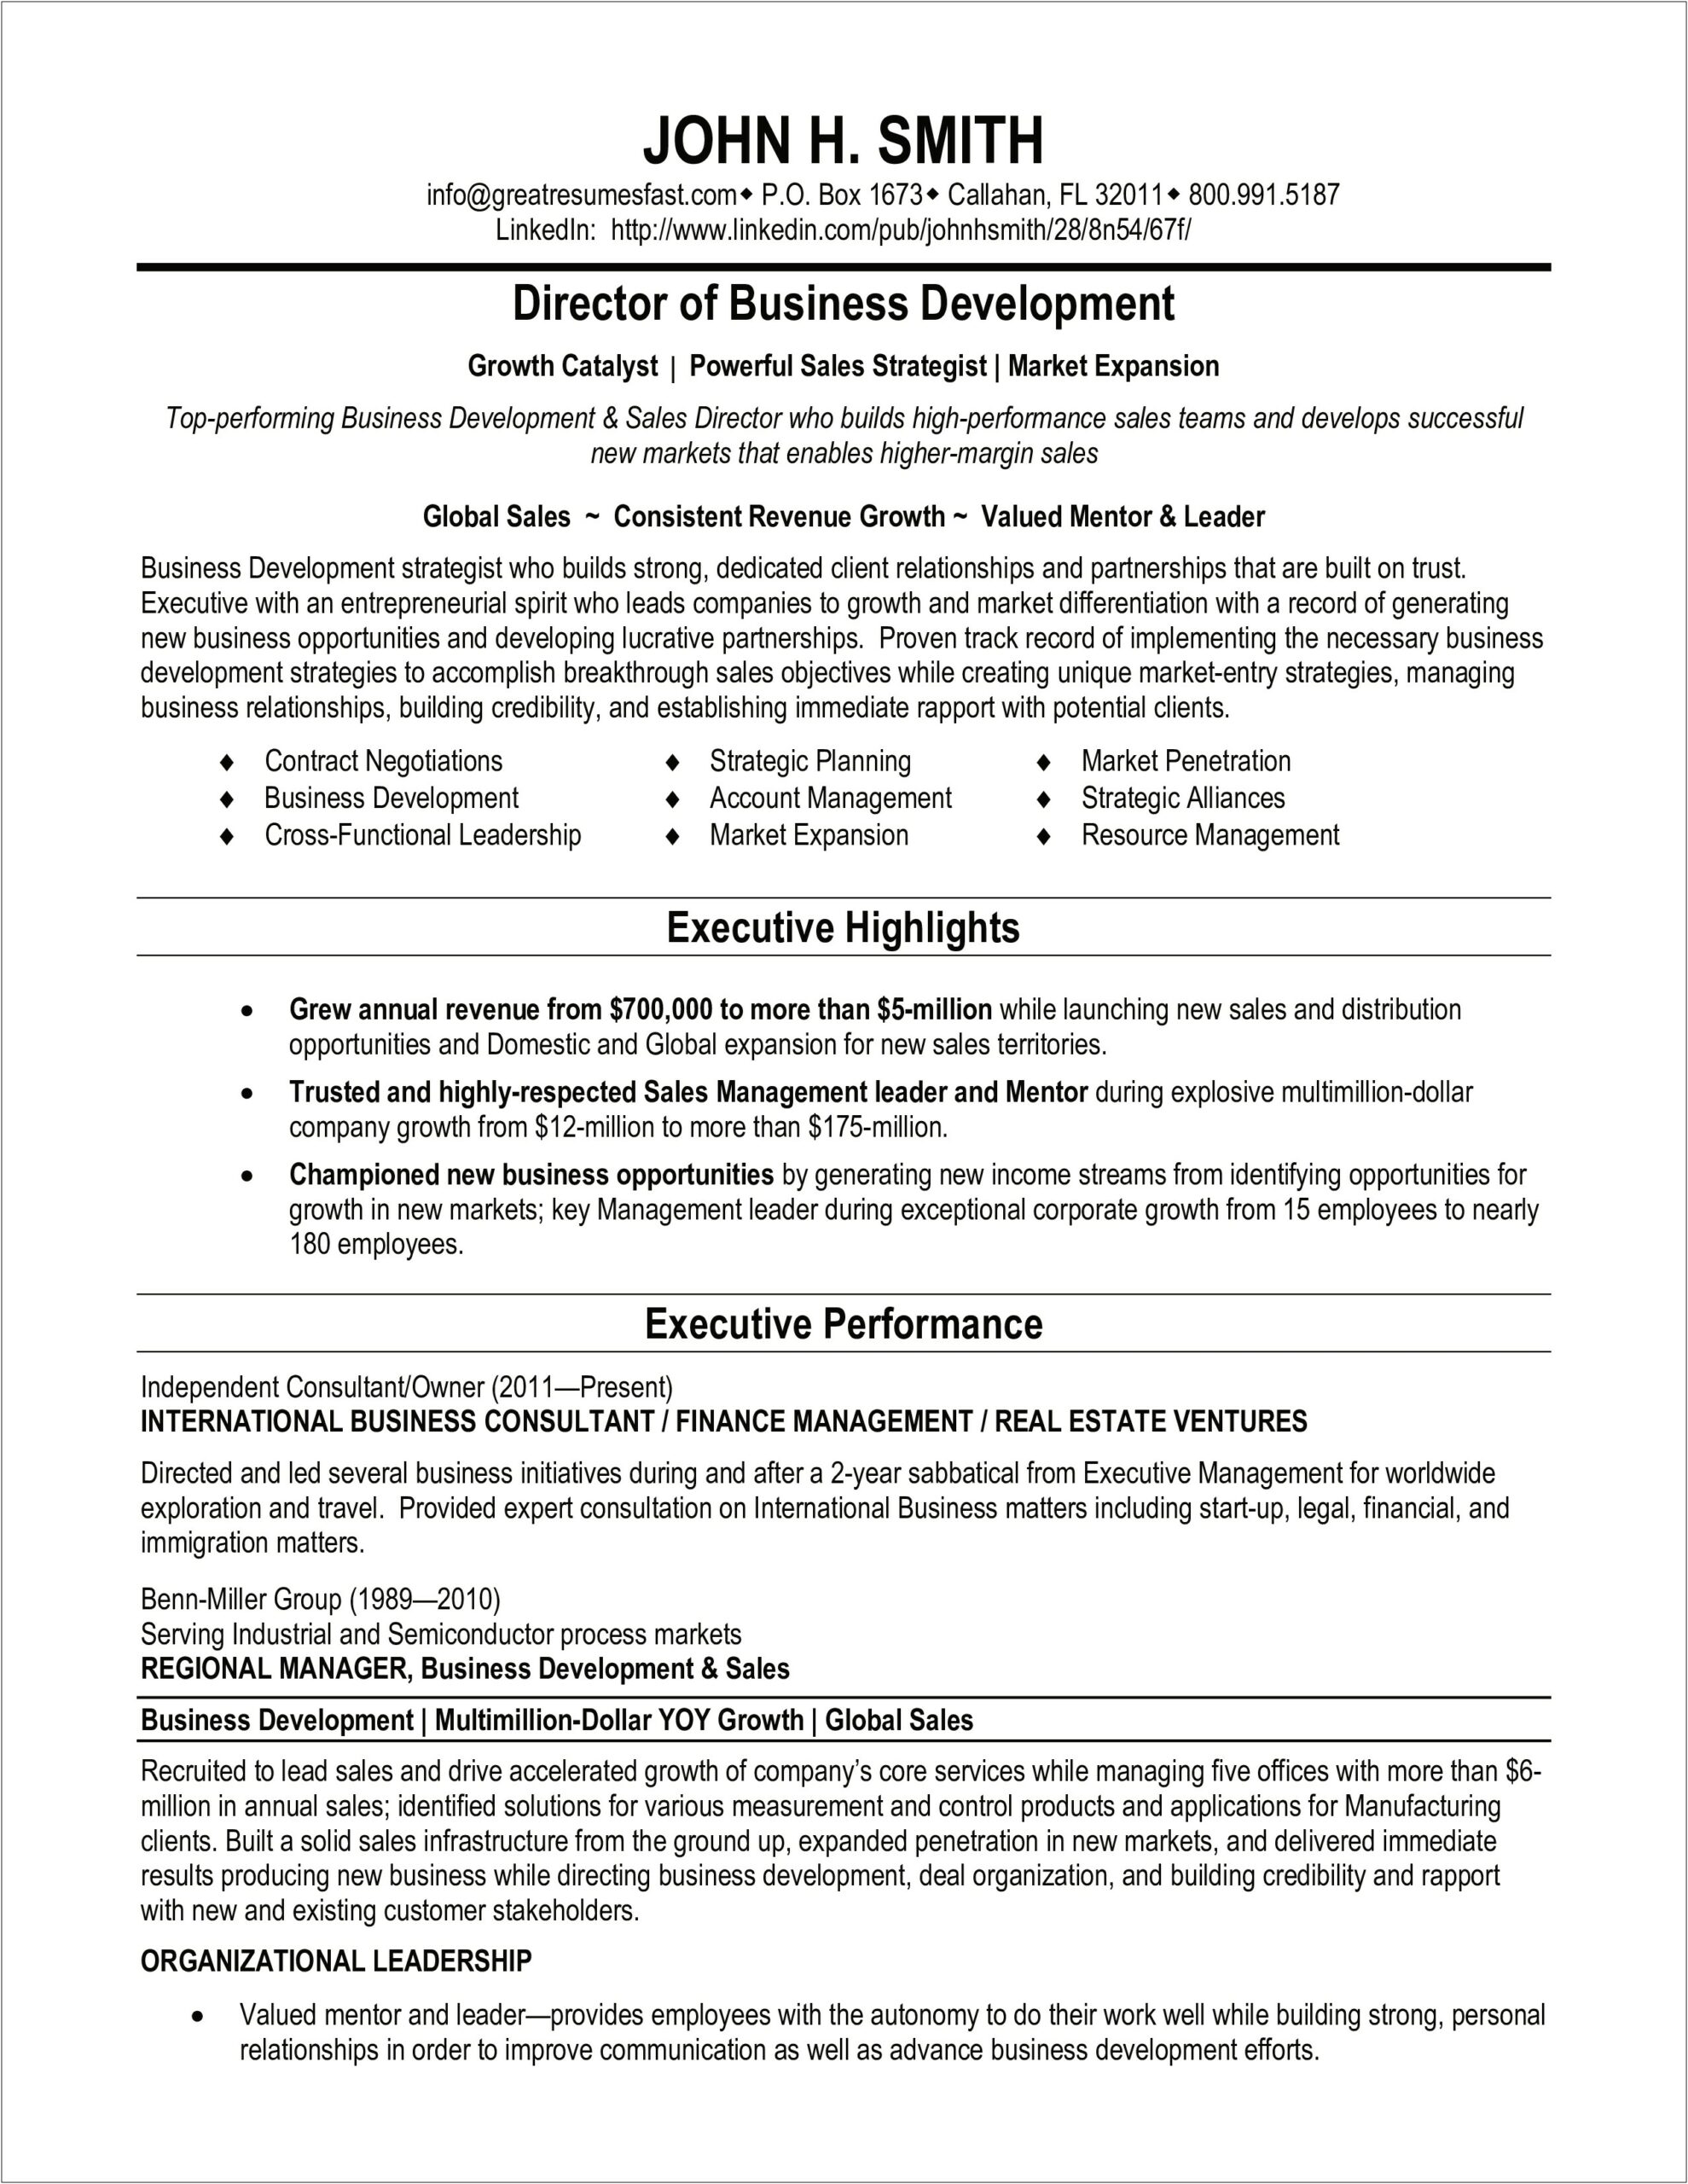 Best Resume Format For Business Development Executive